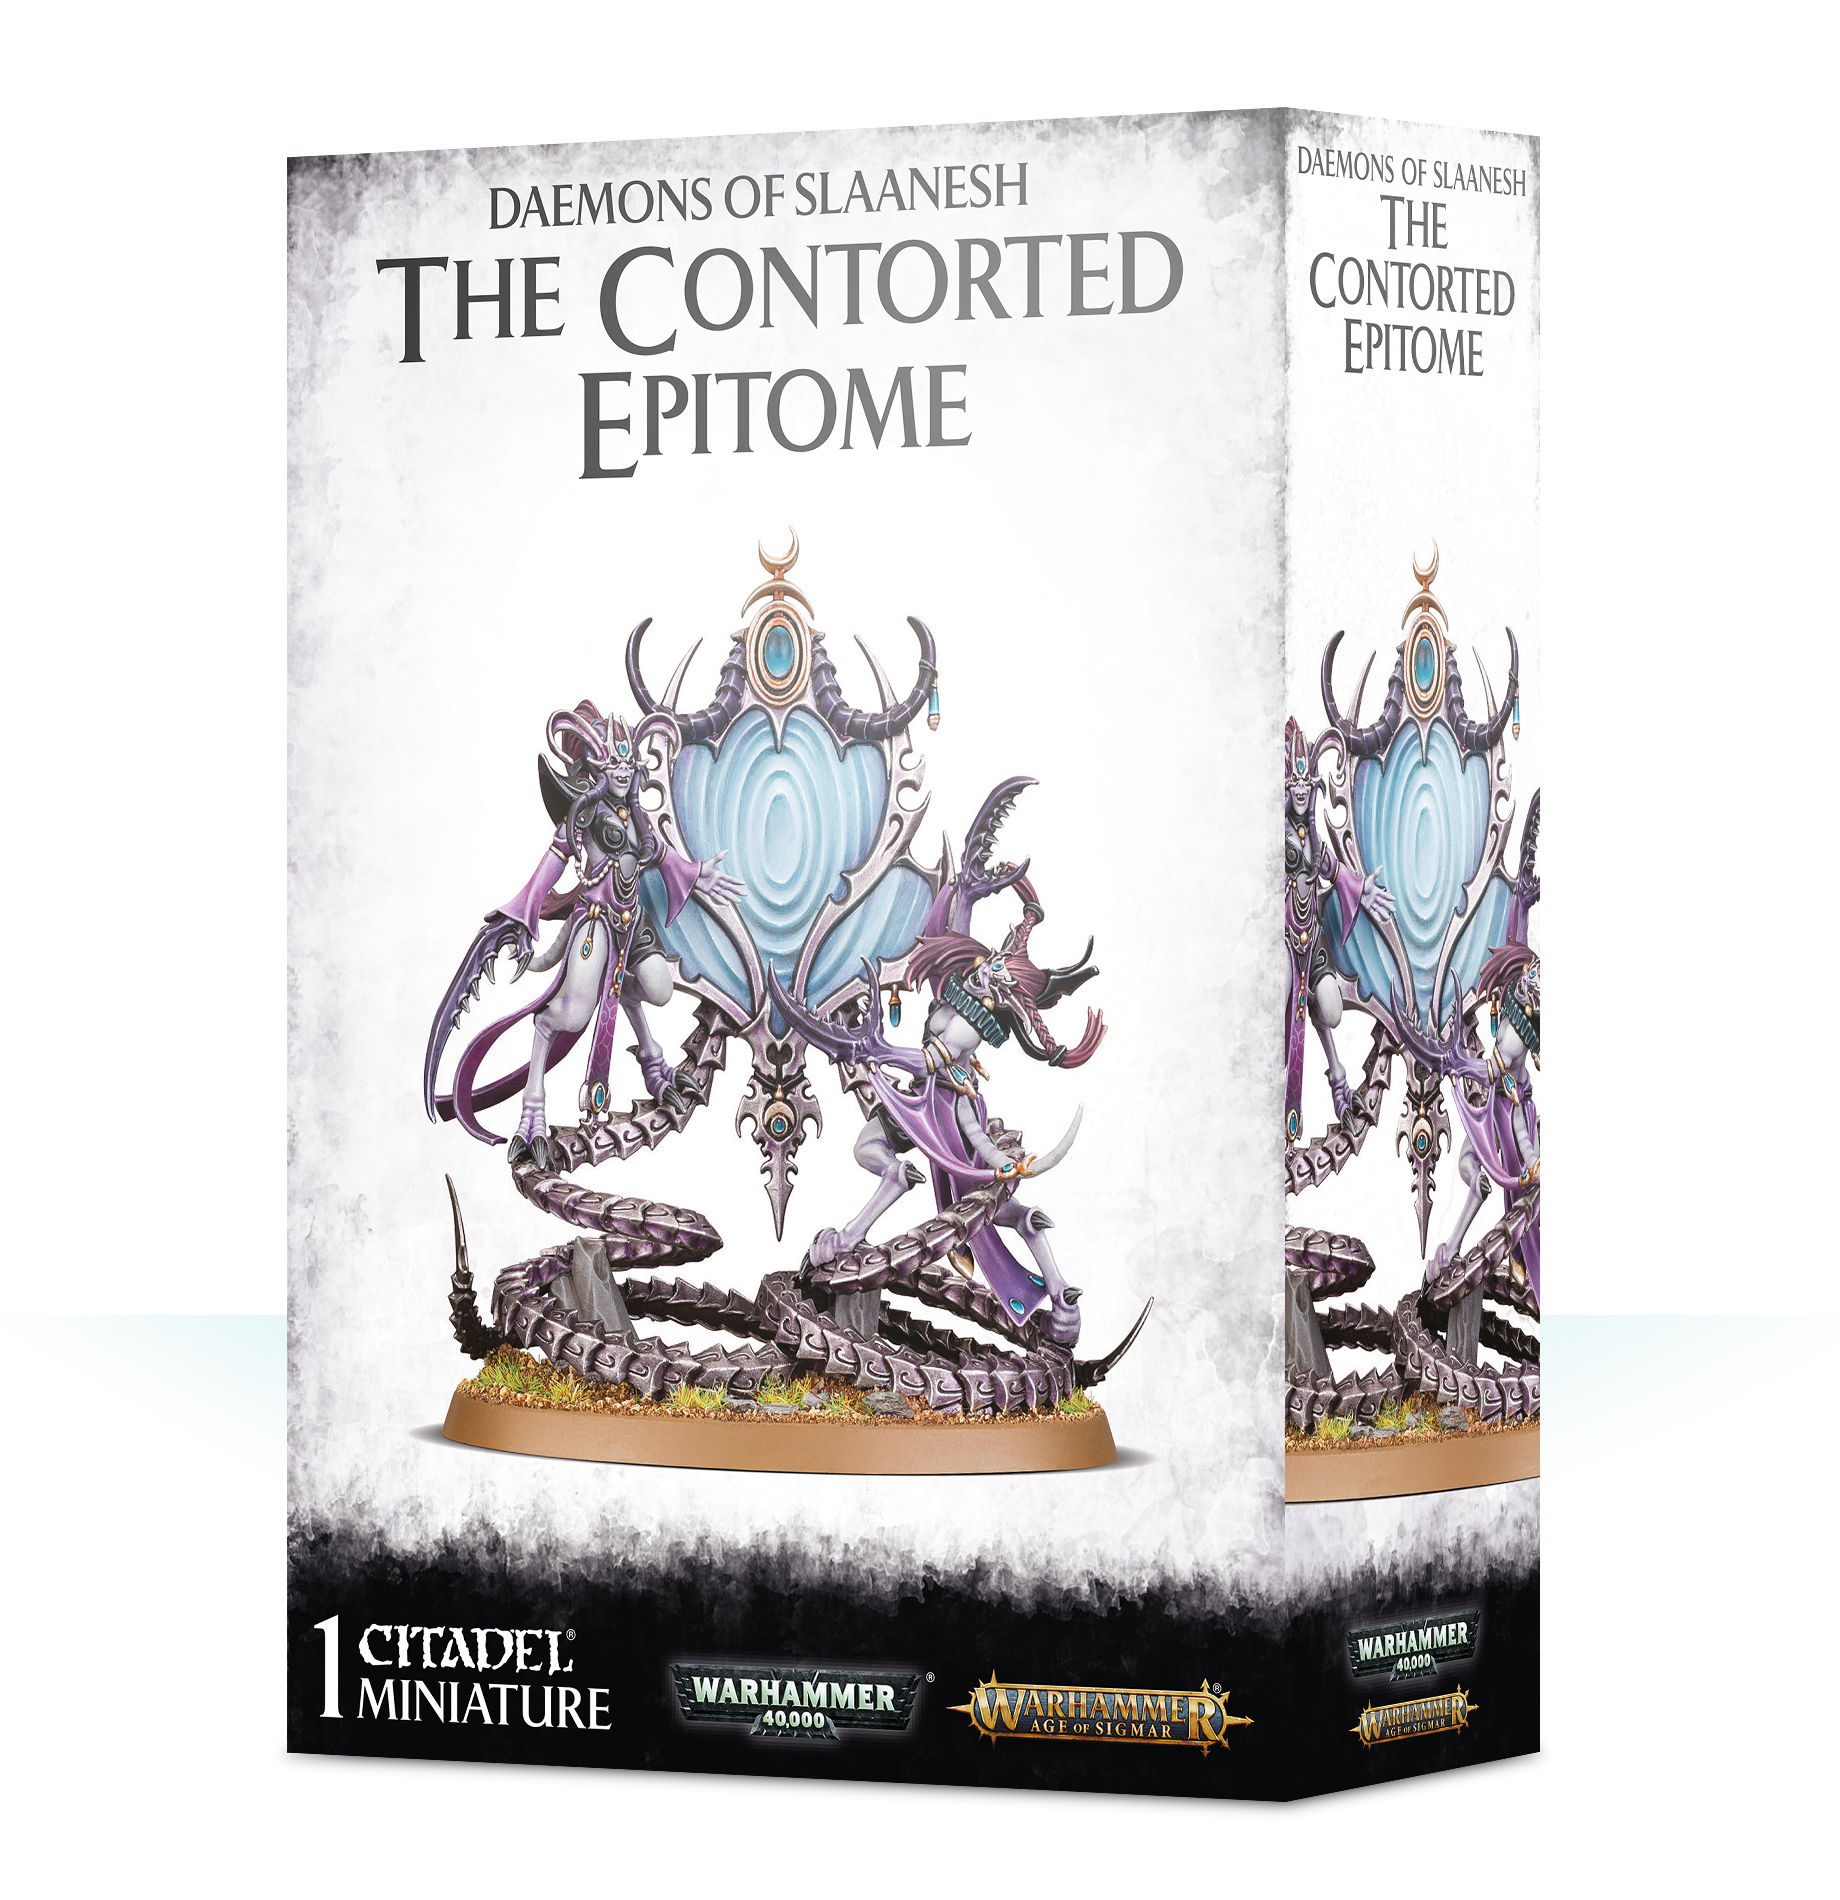 The Contorted Epitome - 97-48 - Daemons of Slaanesh - Warhammer 40,000 et Age of Sigmar